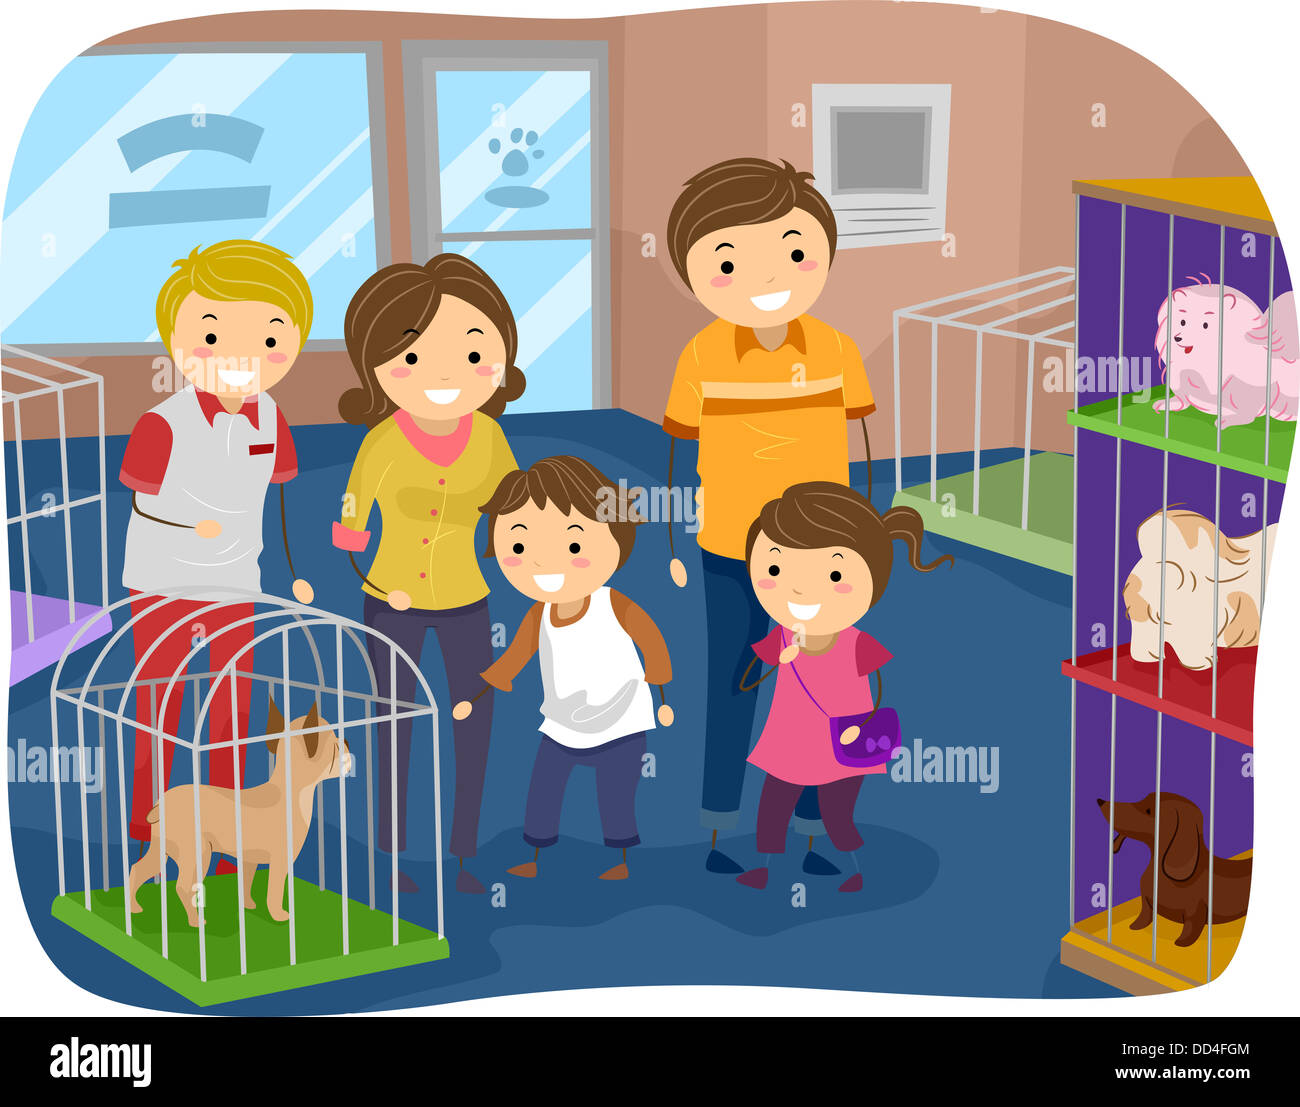 Illustration of Stickman Family Buying a Dog From a Pet Store Stock Photo